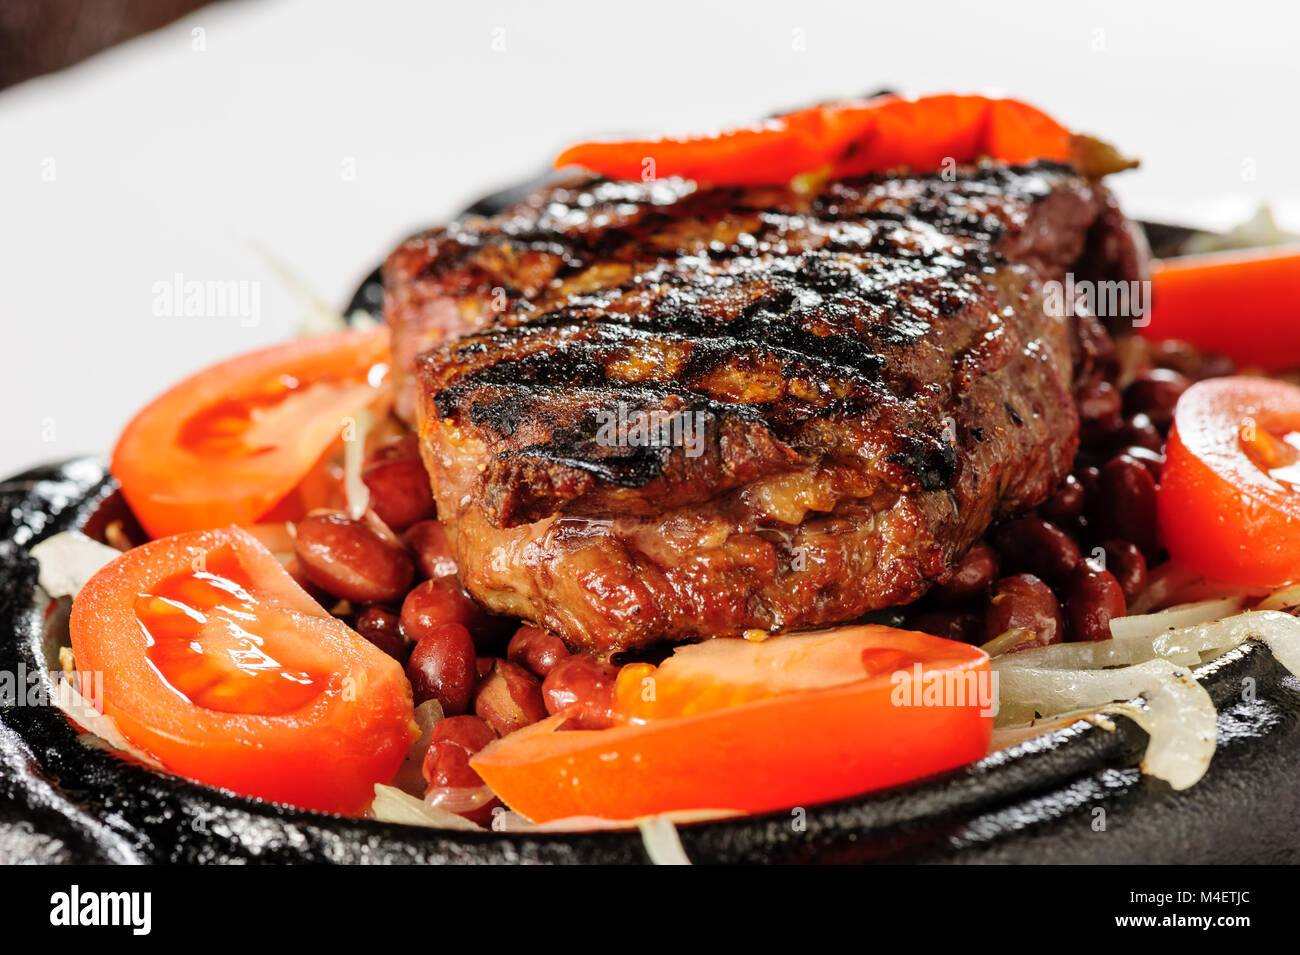 Beef steak with red beans garnish Stock Photo